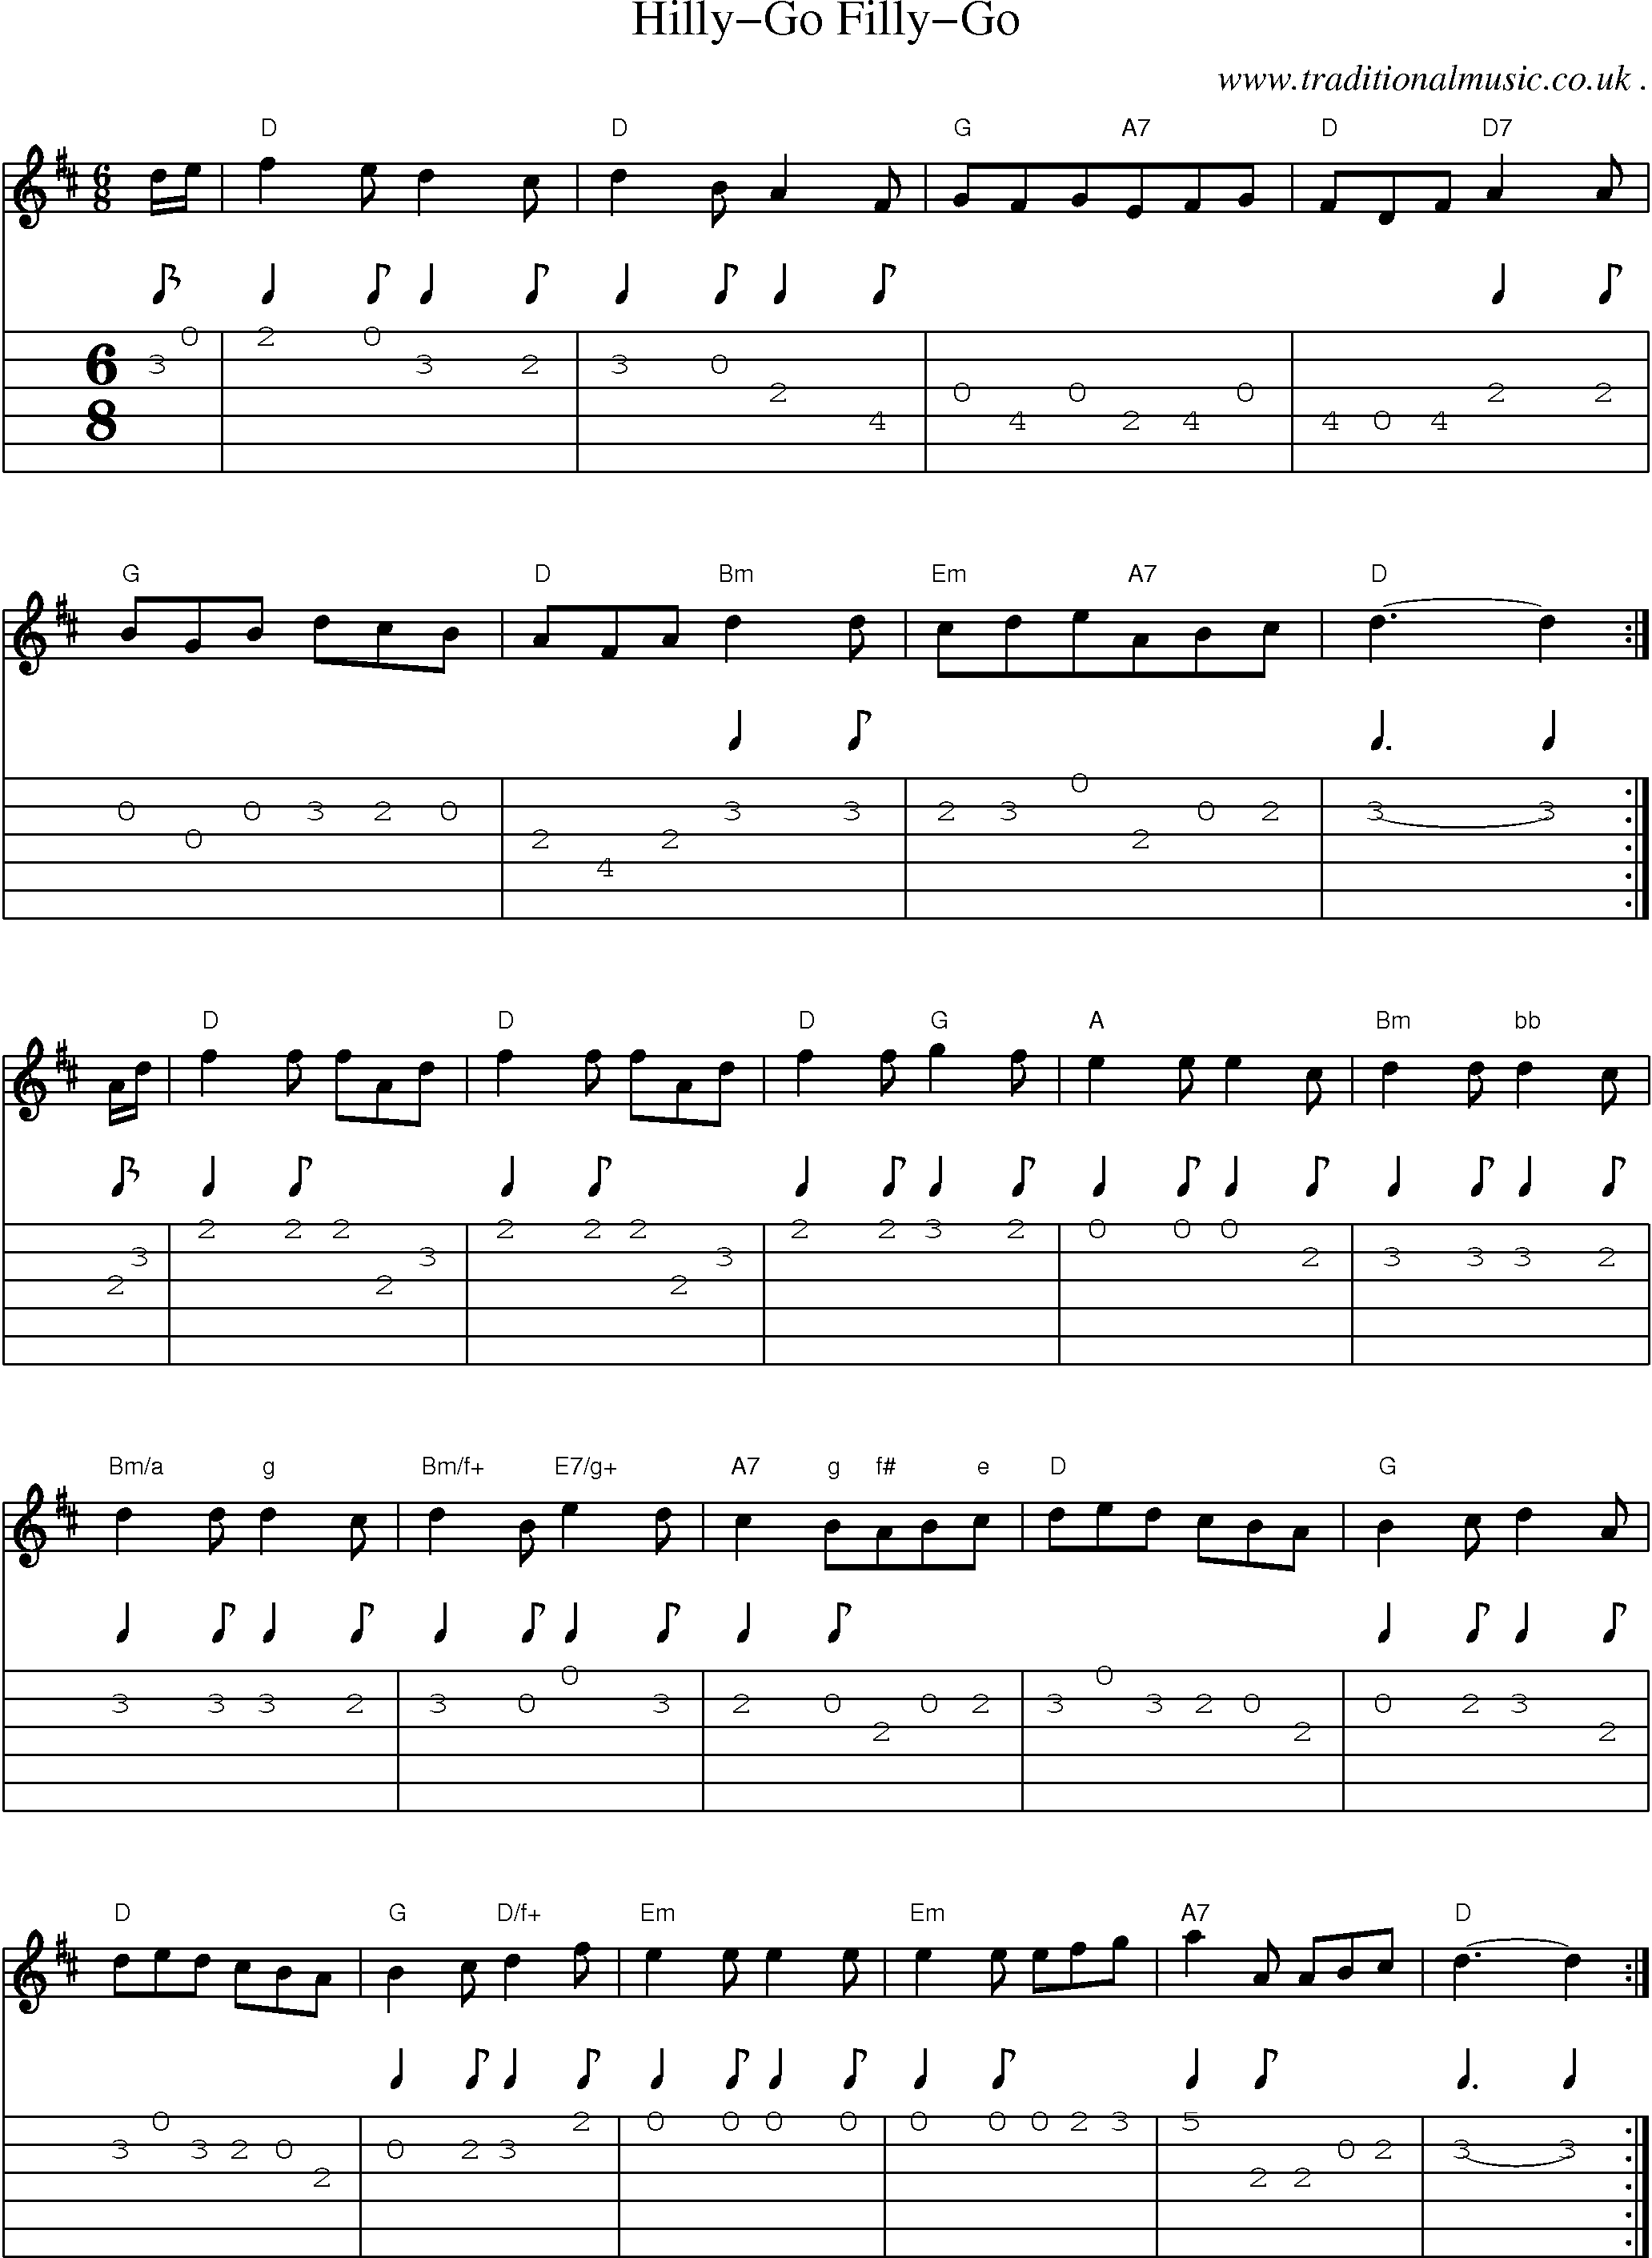 Sheet-Music and Guitar Tabs for Hilly-go Filly-go